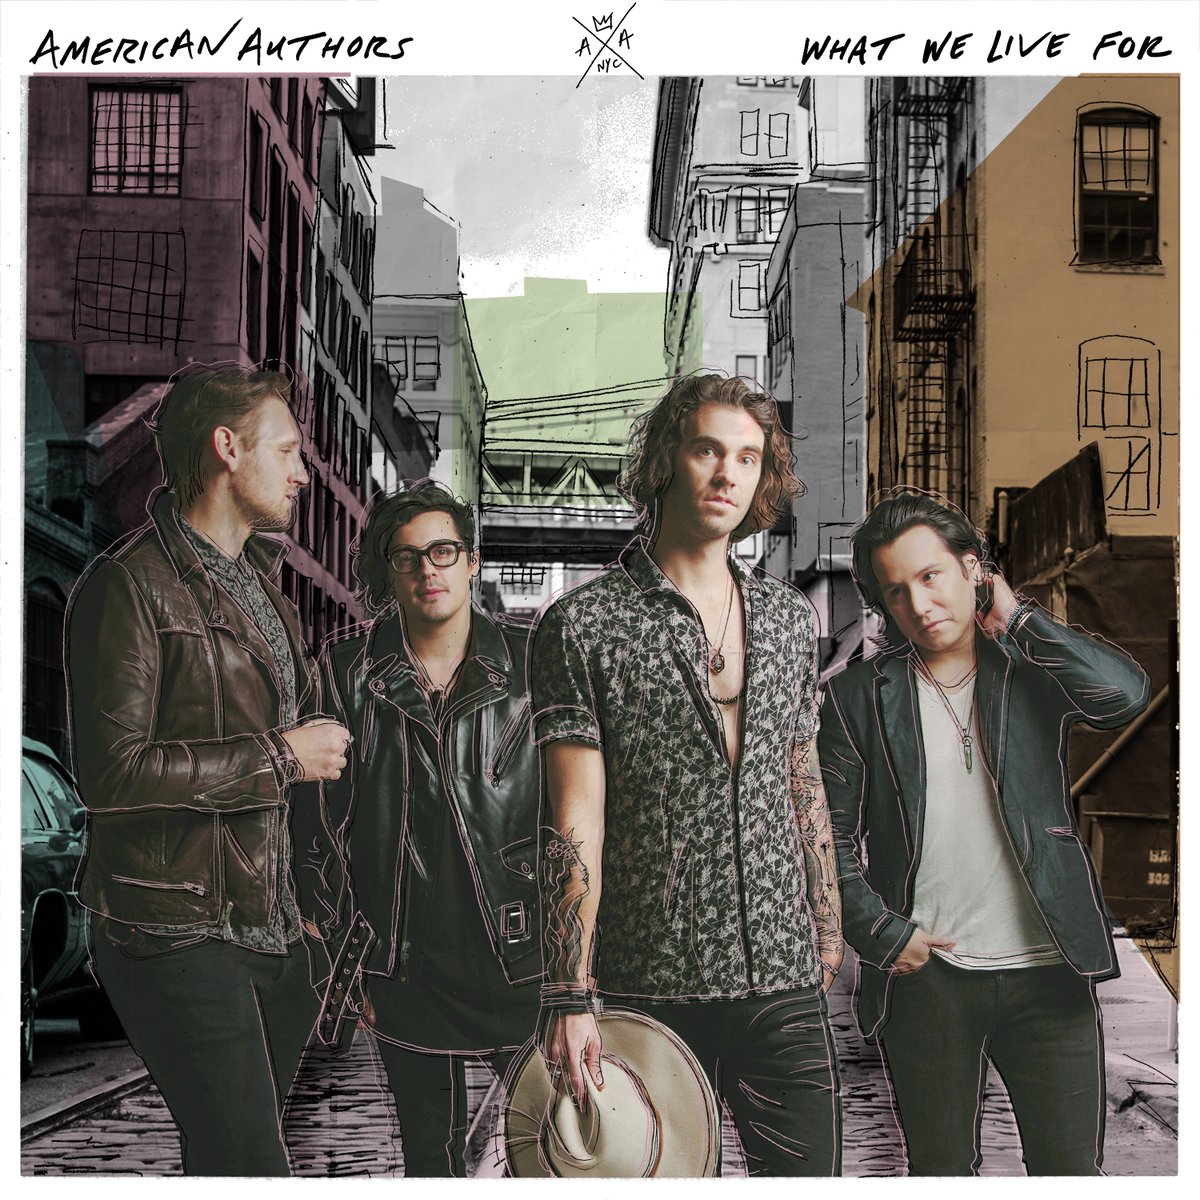 American Authors "What We Live For" Ce-AK_VWIAAgPMr